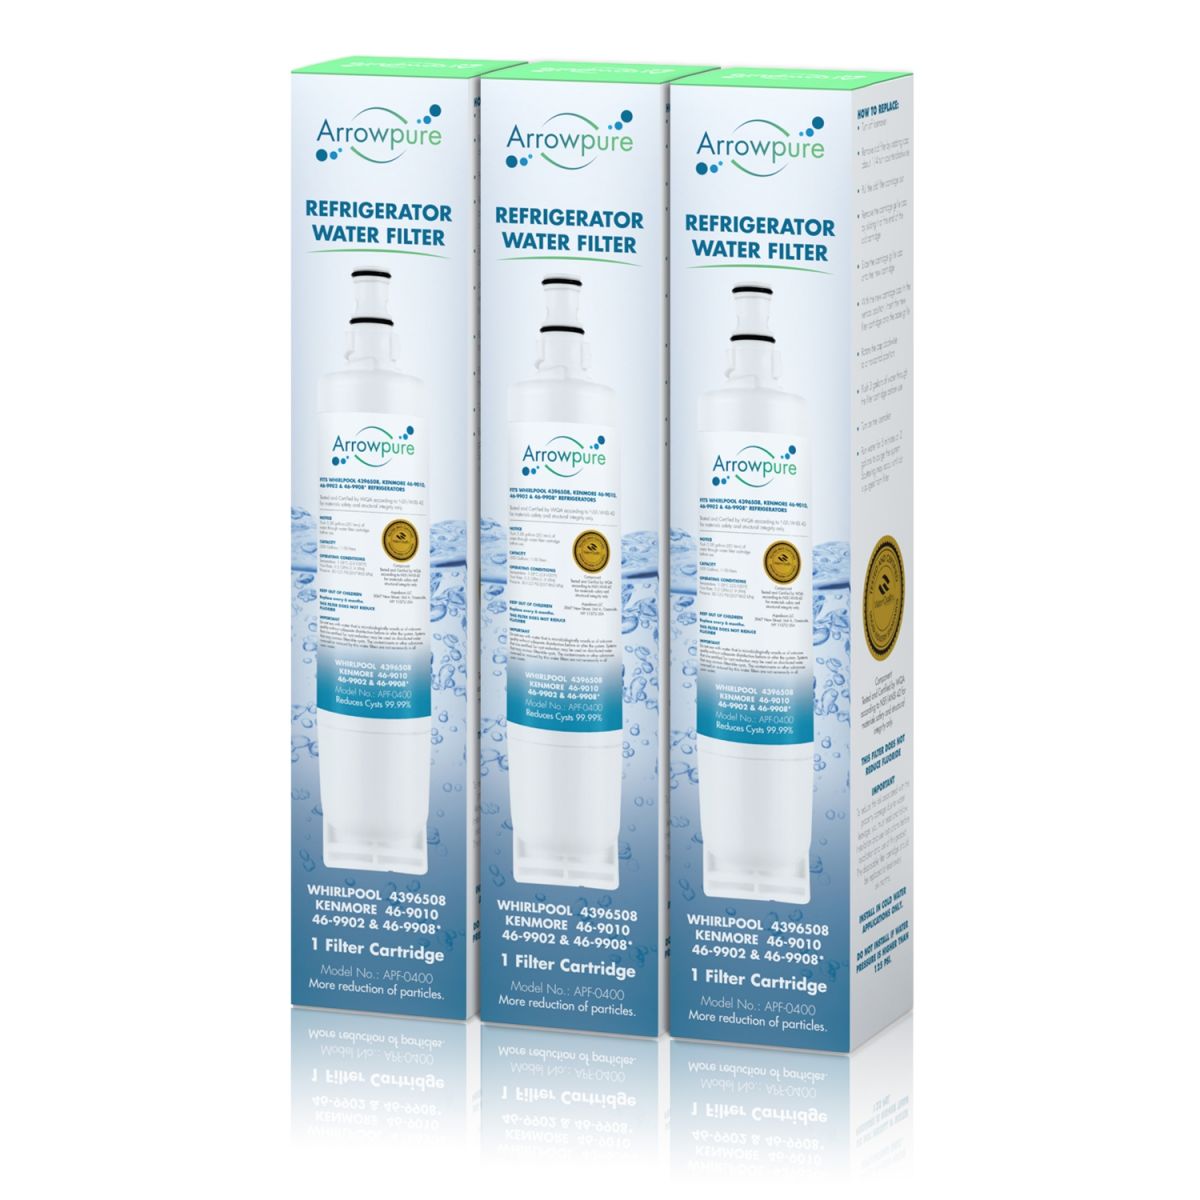 3 Pack Of Arrowpure Refrigerator Water Filter Replacement APF-0400x3